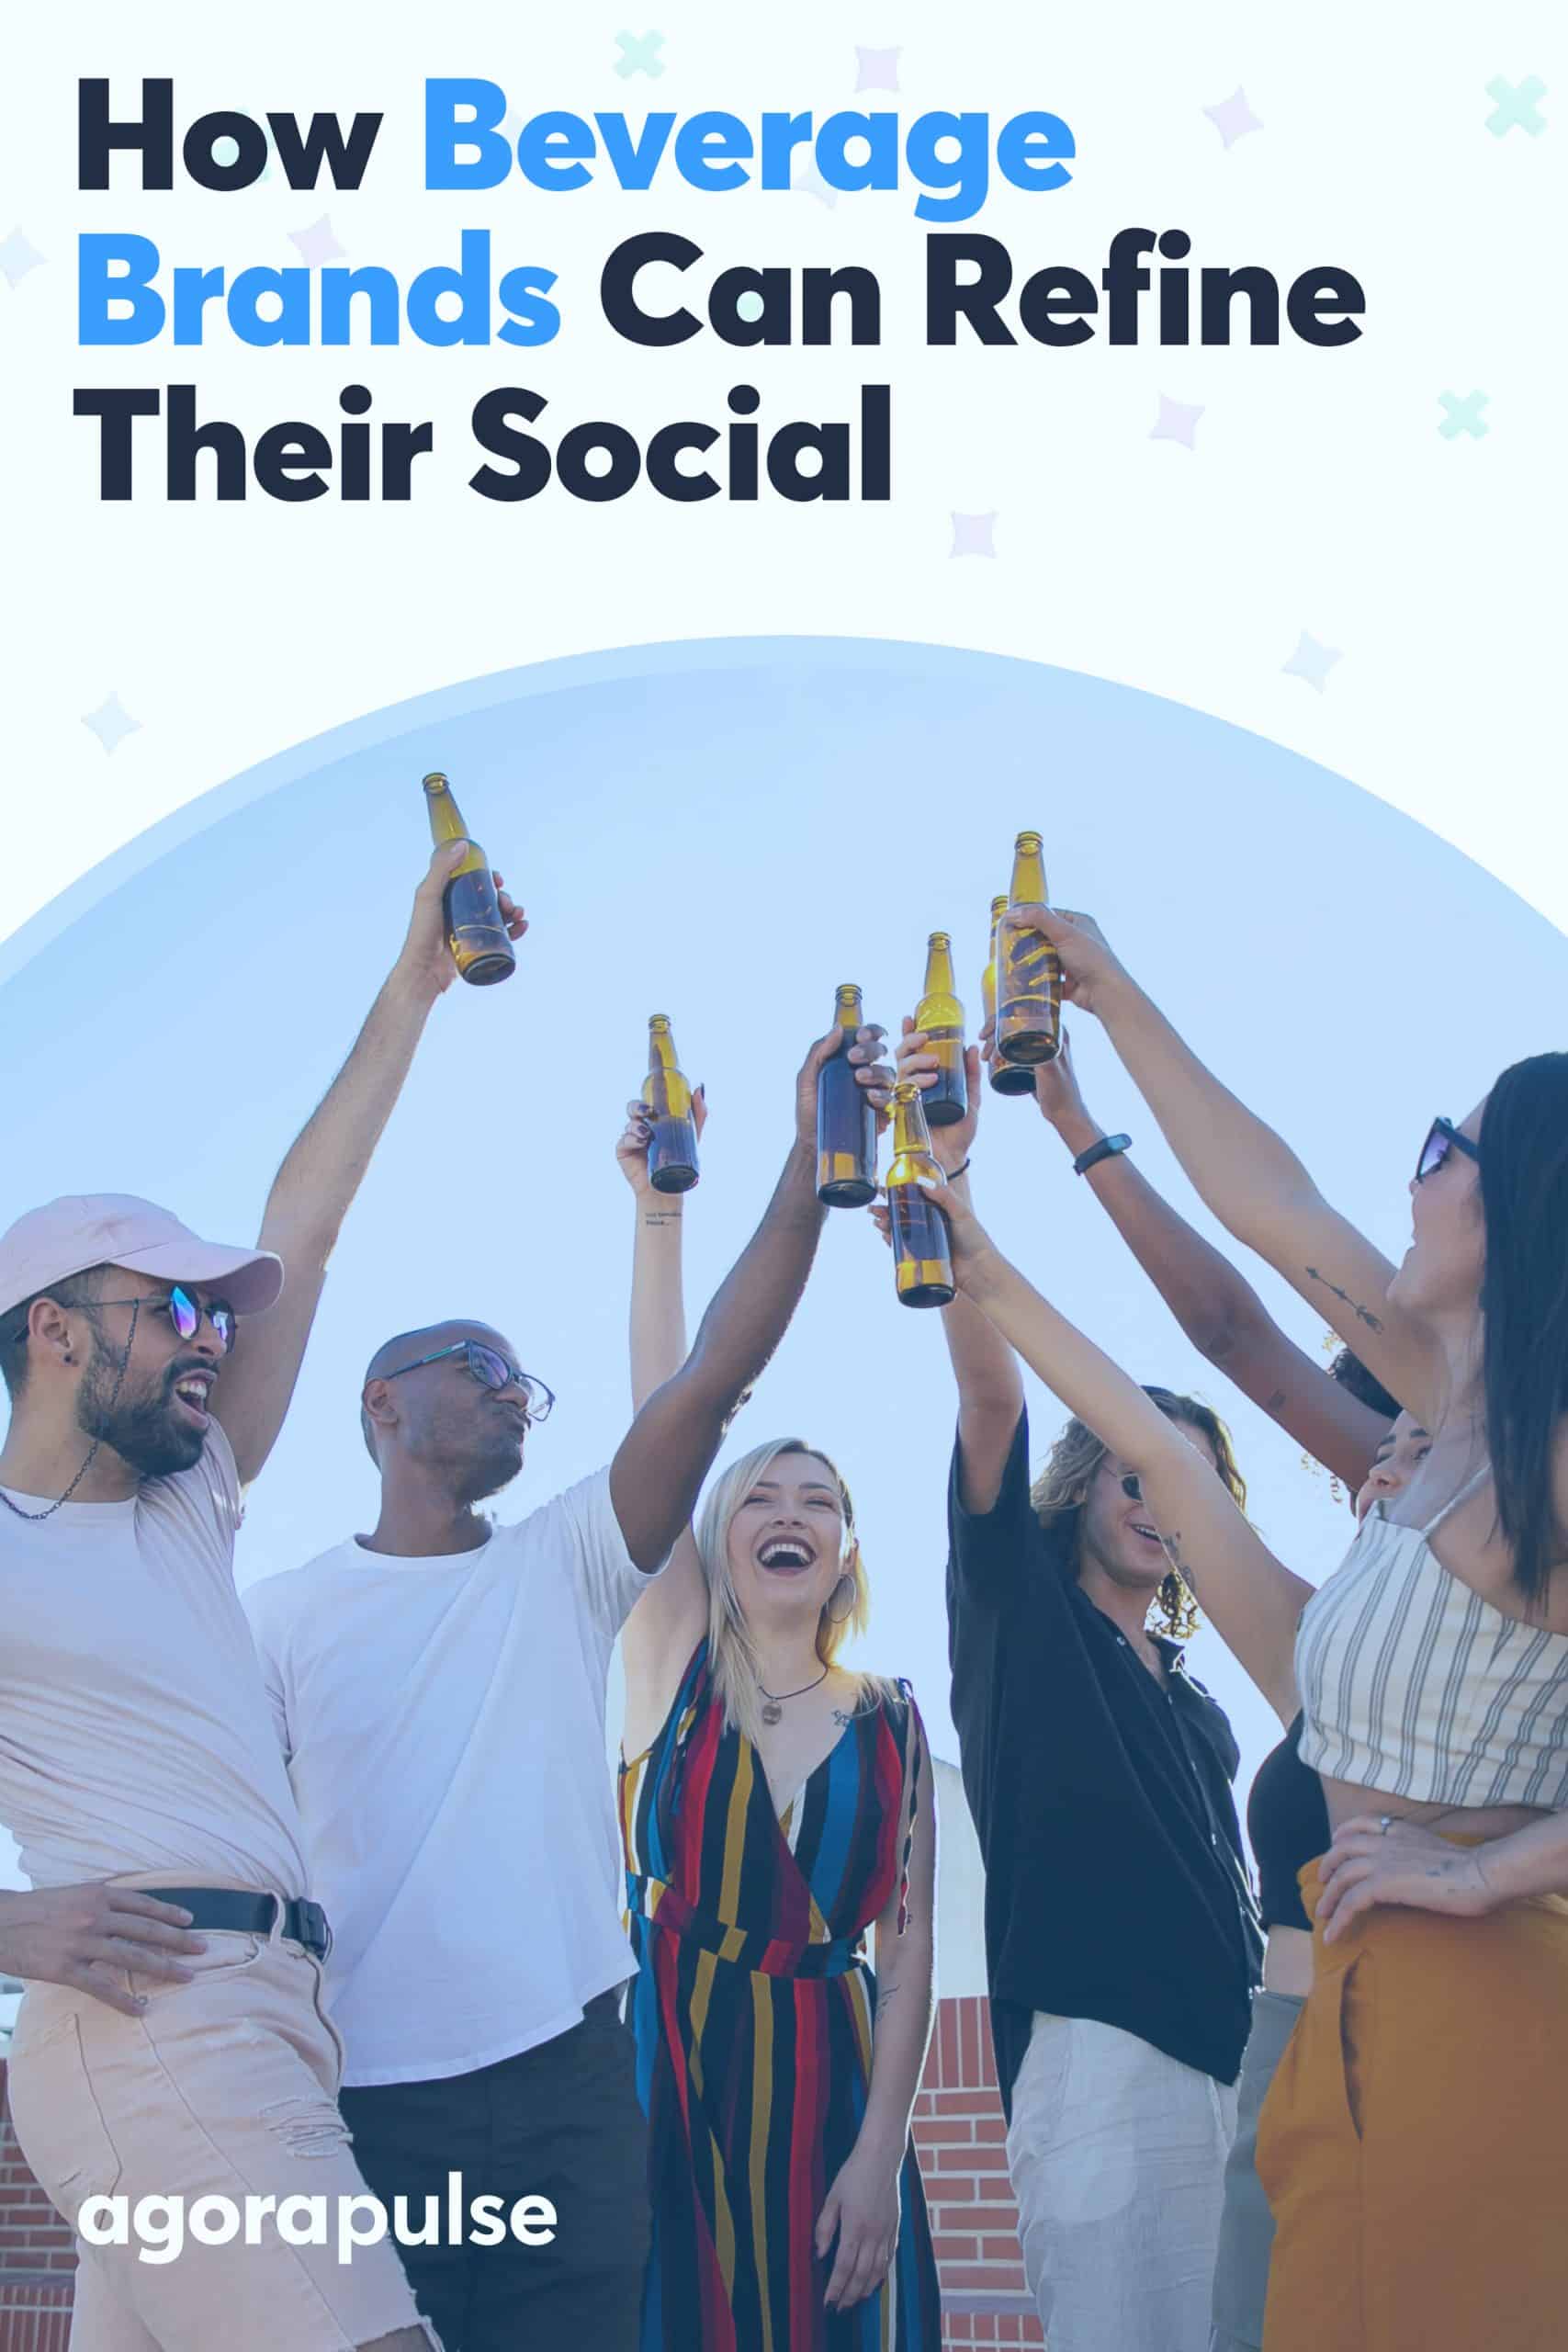 How Food and Beverage Brands Can Refine Their Marketing Through Social Media